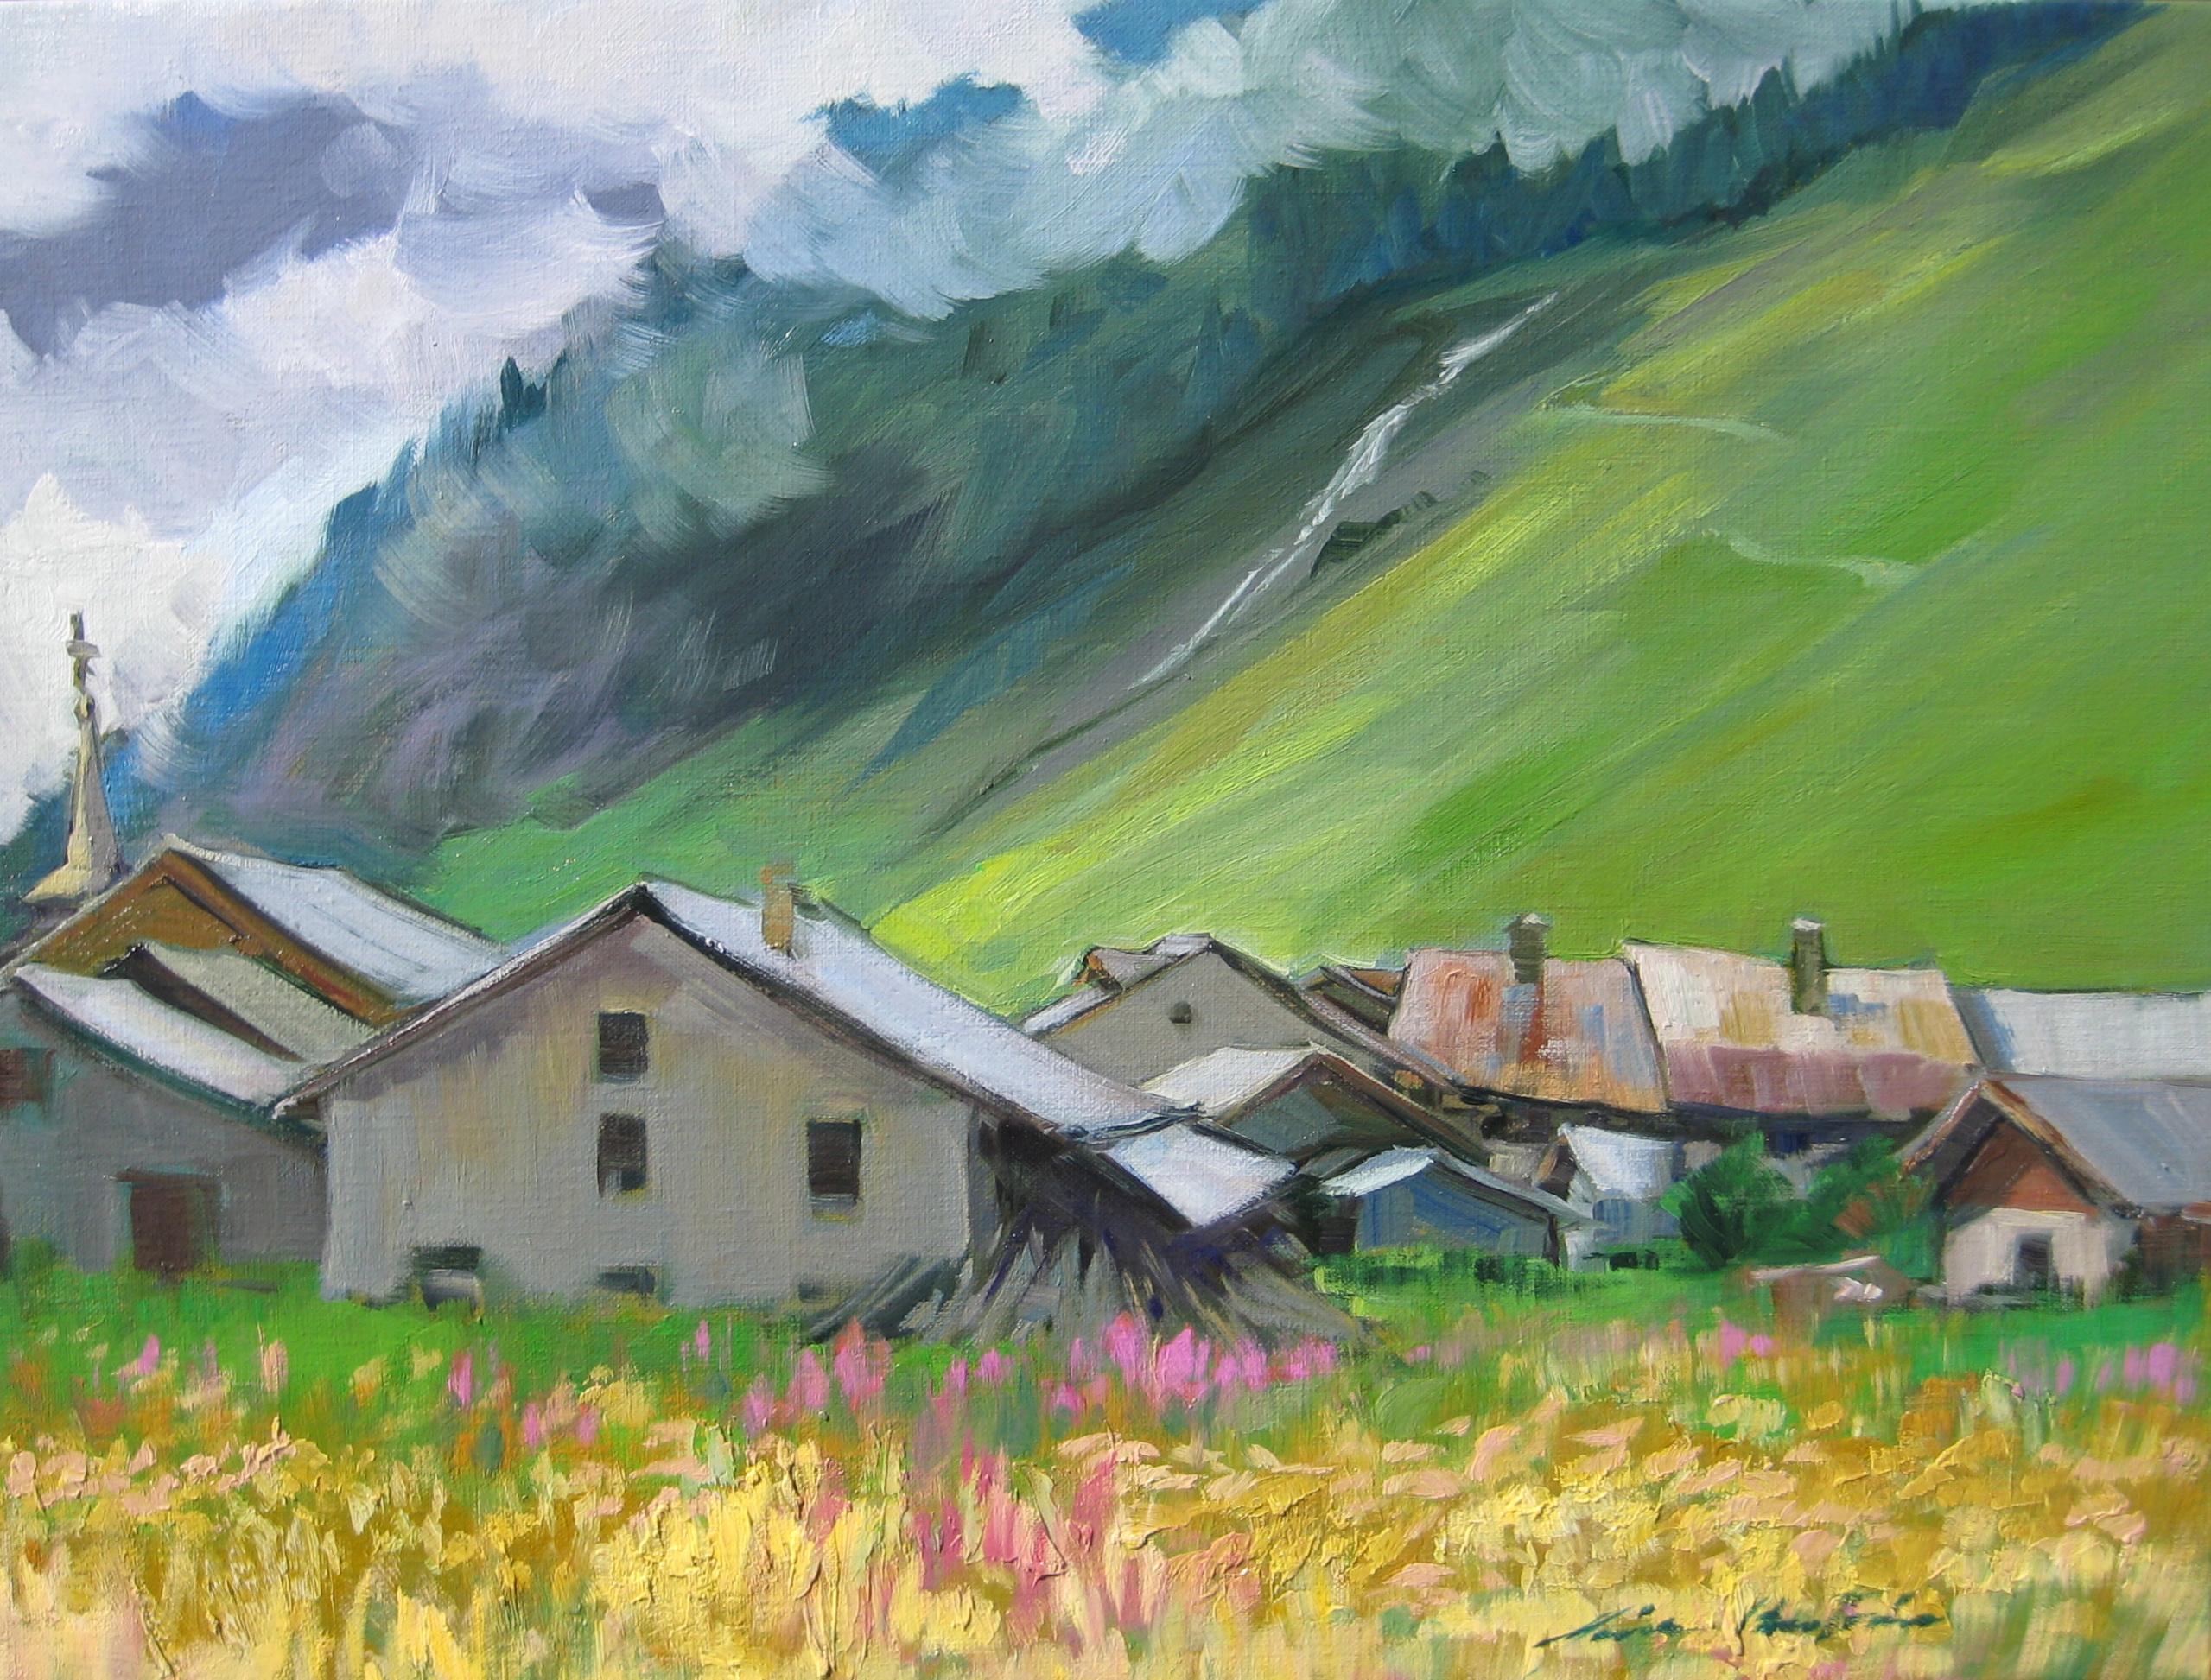 Maria Bertrán Landscape Painting - "Les Bois Farmhouses" Modern Impressionist Oil of French Alps by Maria Bertran